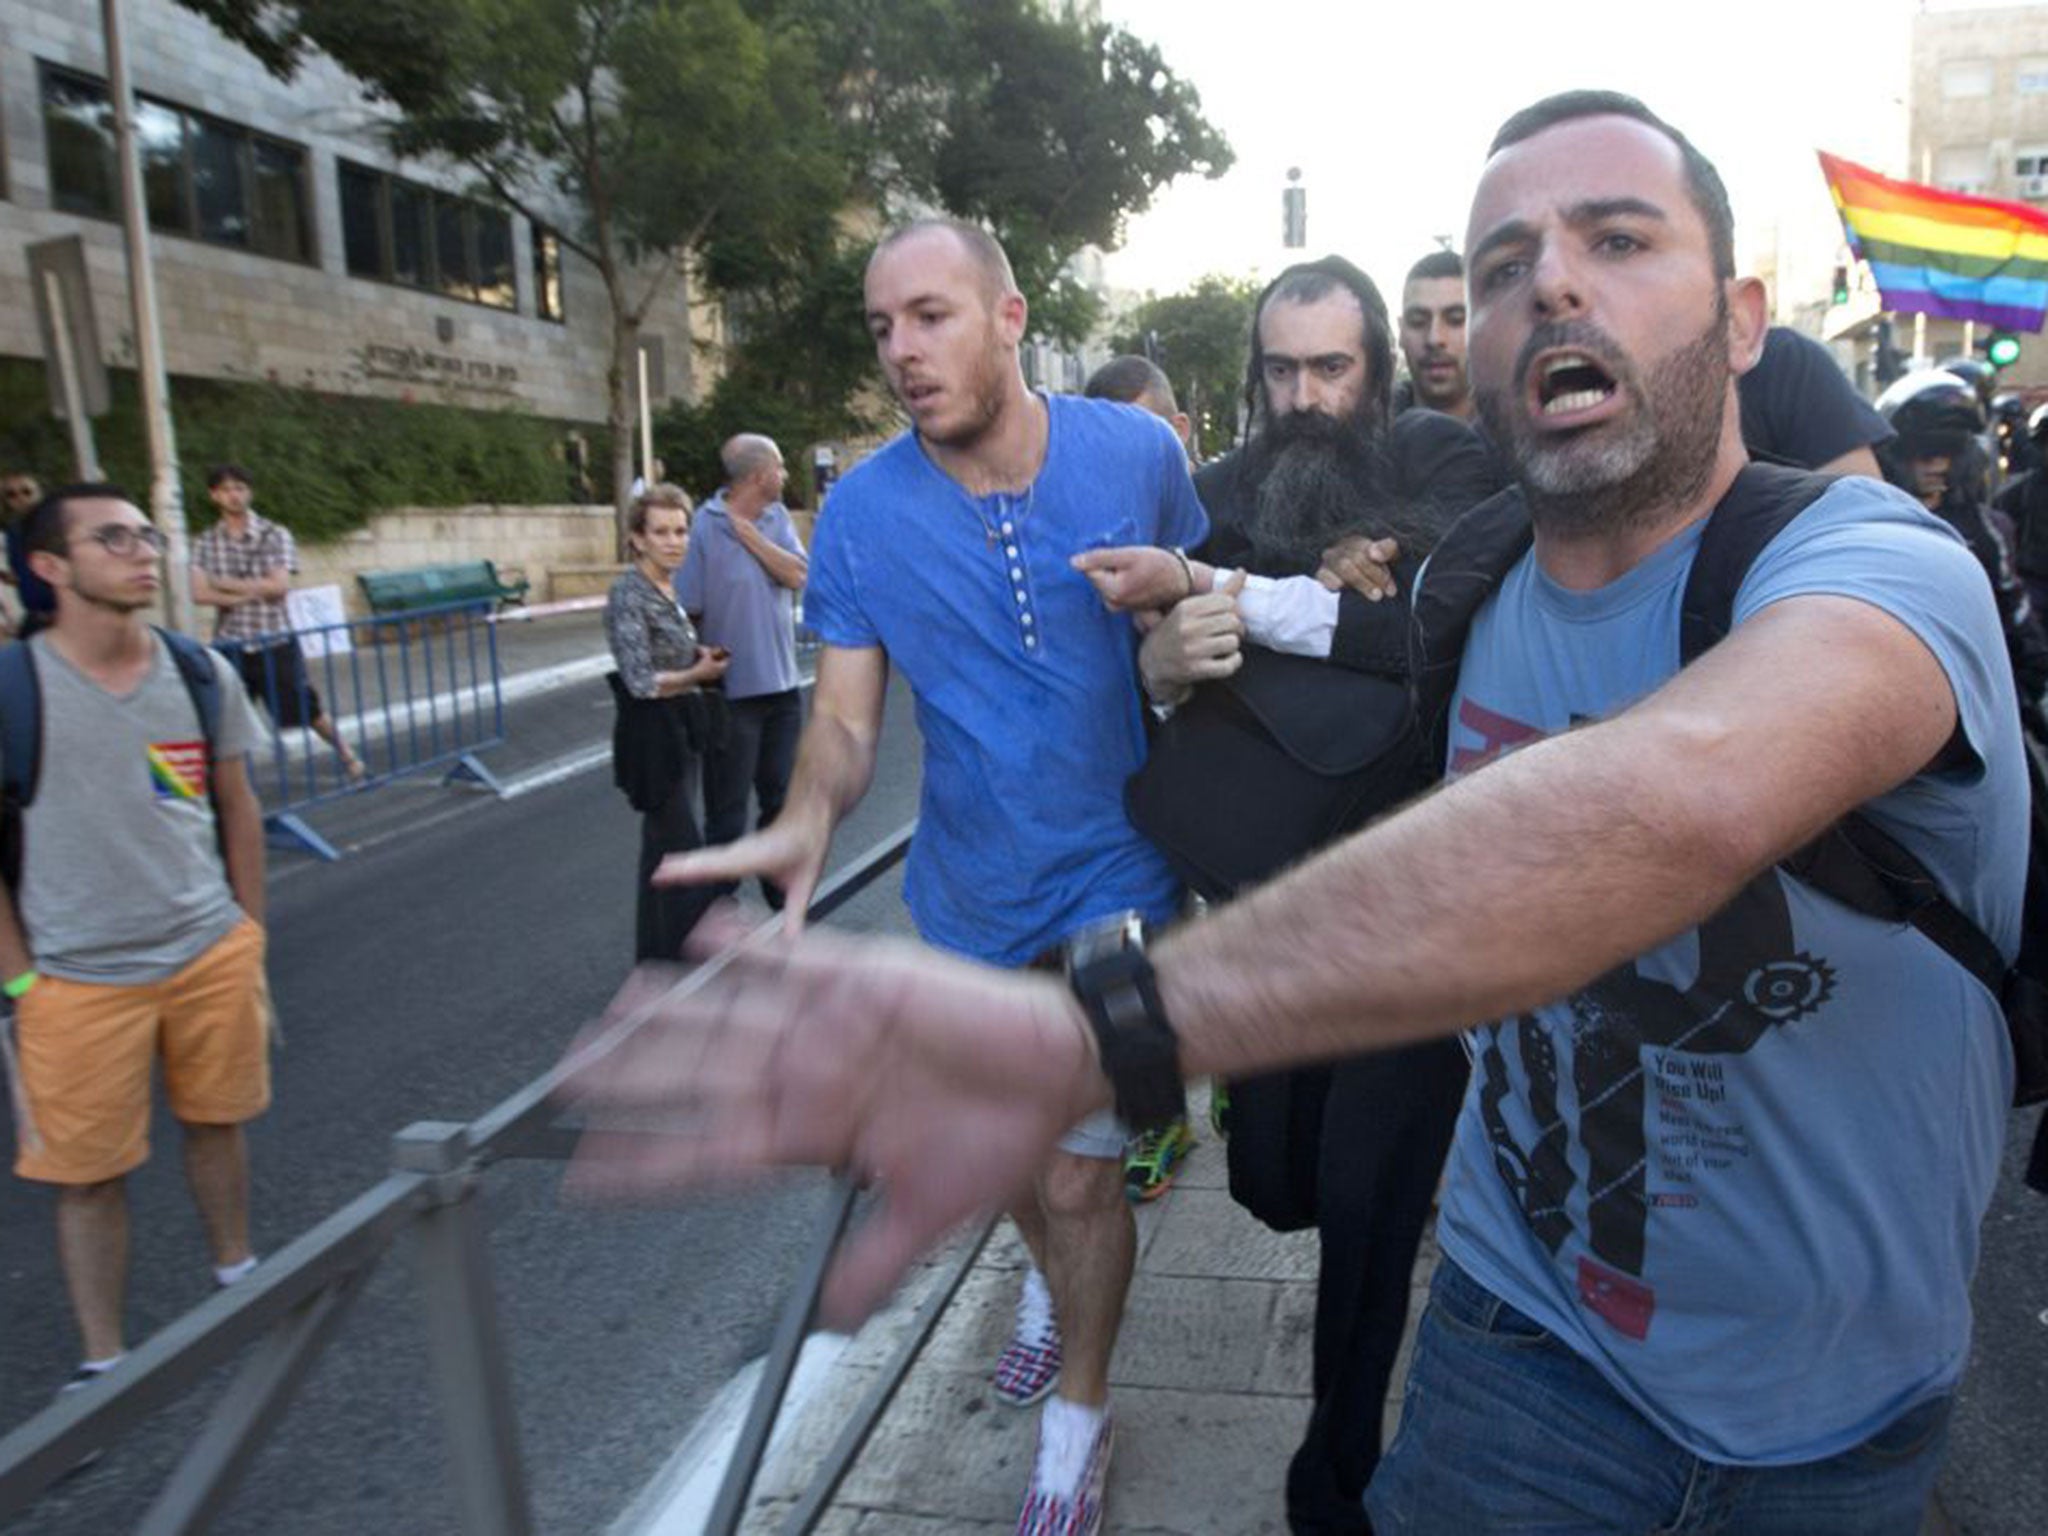 Yishai Schlissel is led away by Israeli plain clothes police officers after the Gay Pride march stabbing